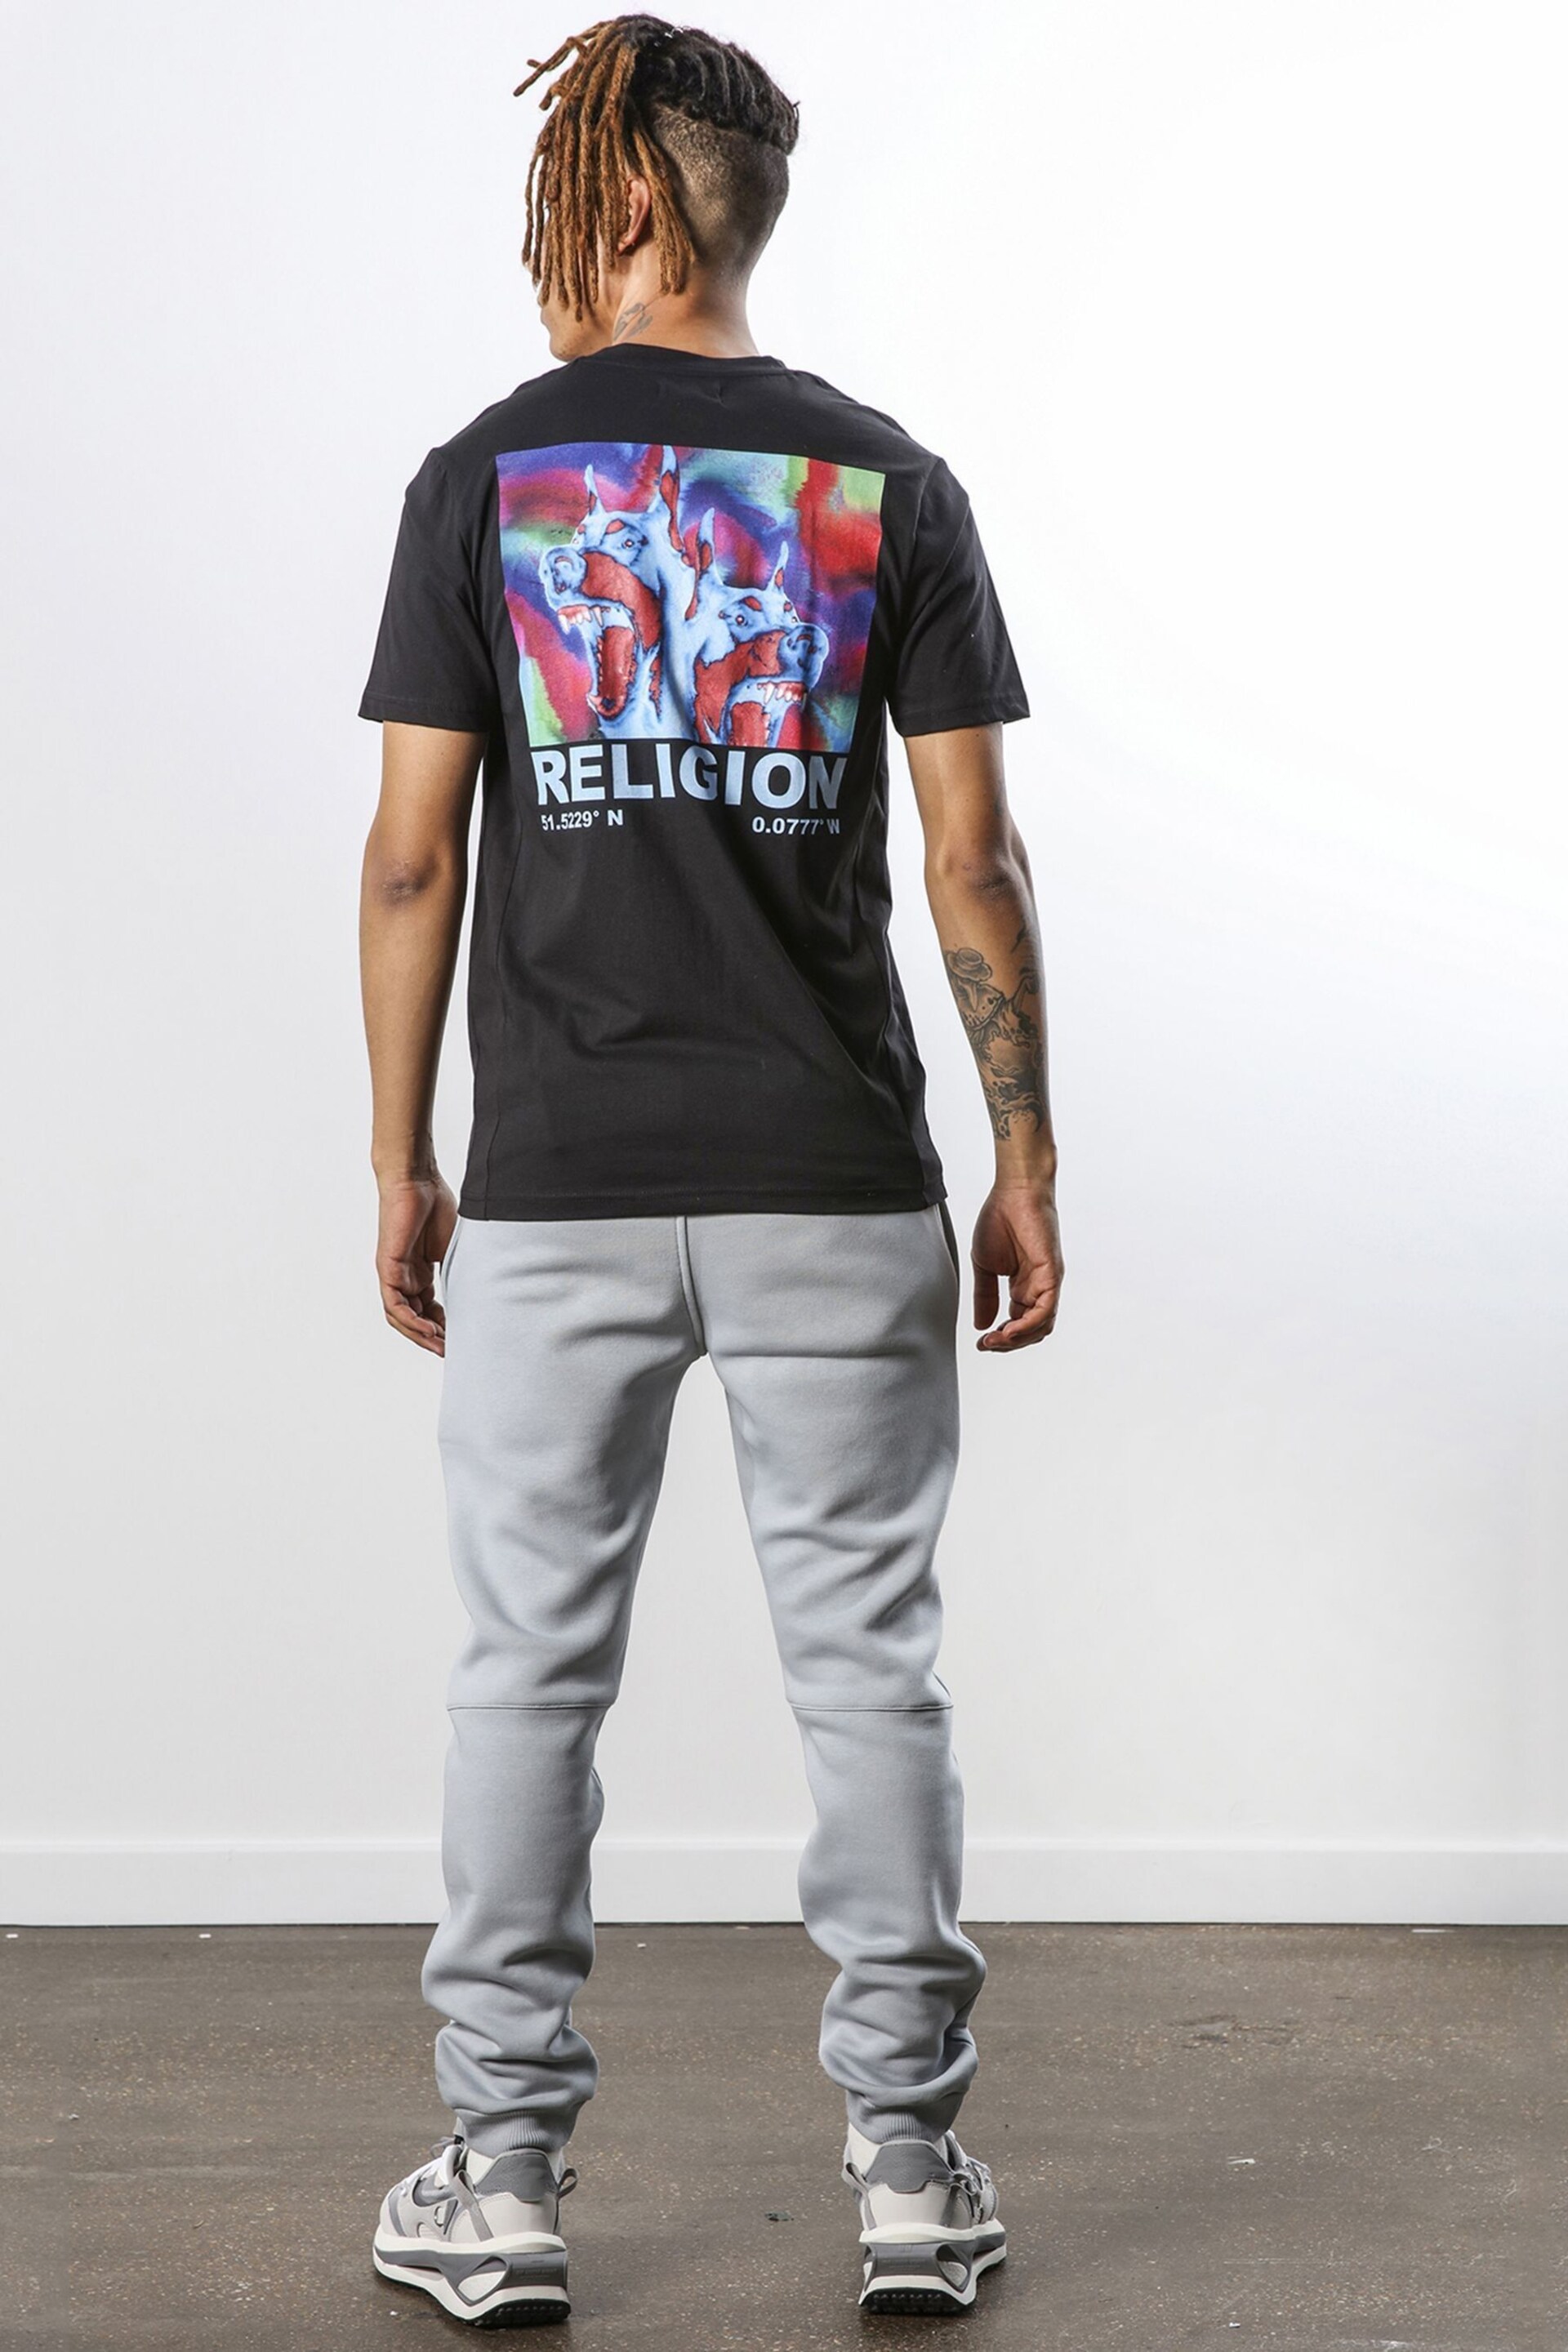 Religion Black Relaxed Fit Graphic Soft Cotton T-Shirt - Image 4 of 5